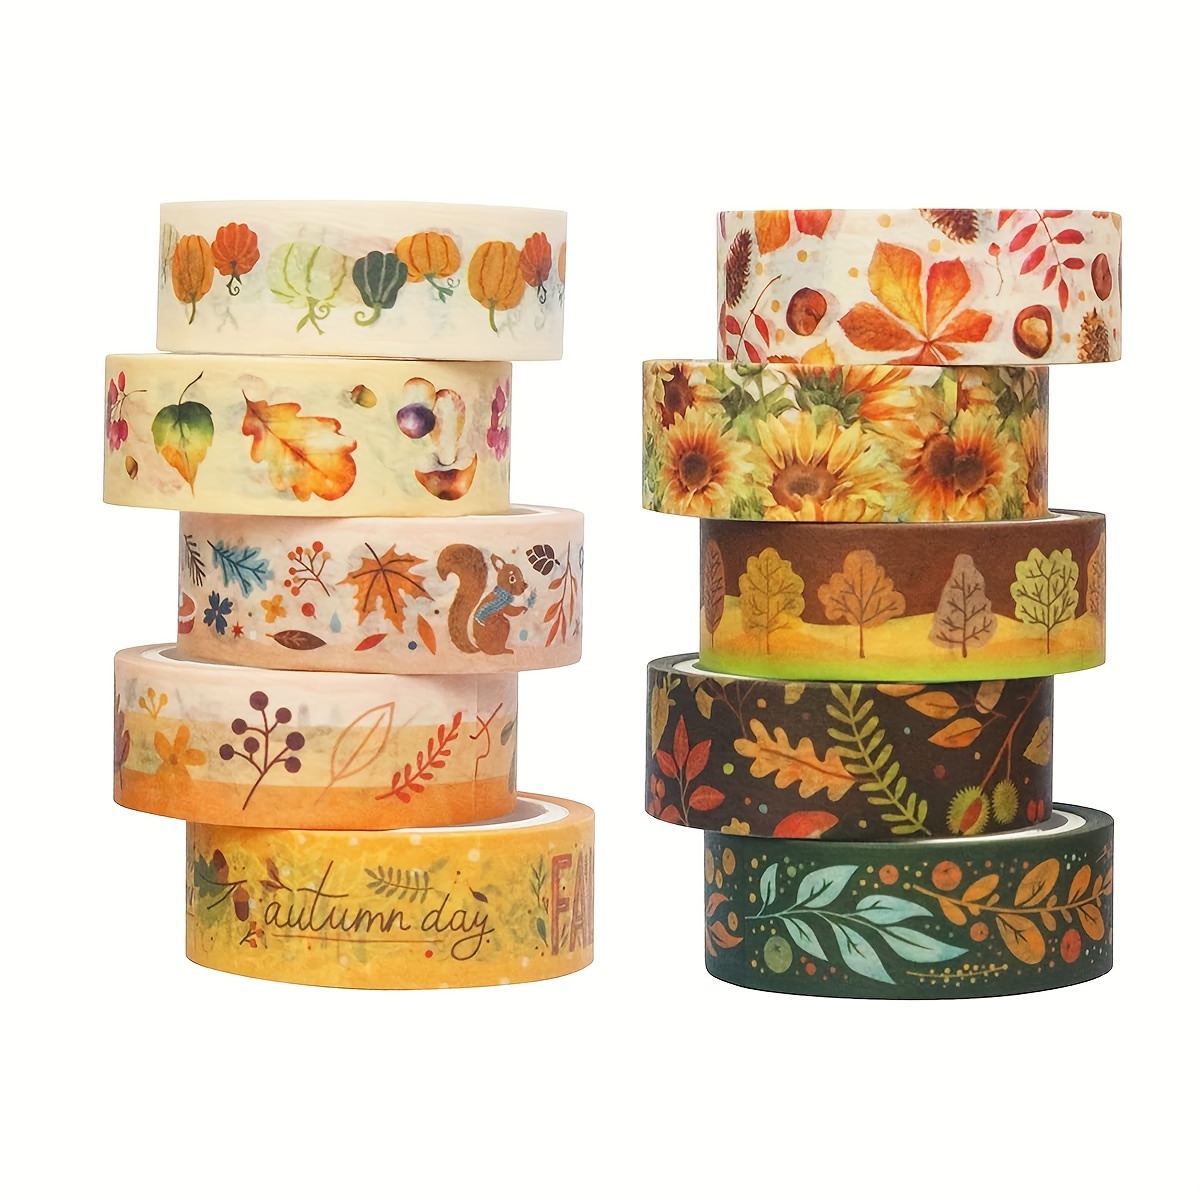 

10 Rolls Autumn Spring Winter Washi Tape - Autumn Leaves Pumpkin Sunflower Fall Washi Masking Tape Decorative Tape For Bullet Journal, Planner, Diy Arts & Crafts, Scrapbooking, Gift Wrapping